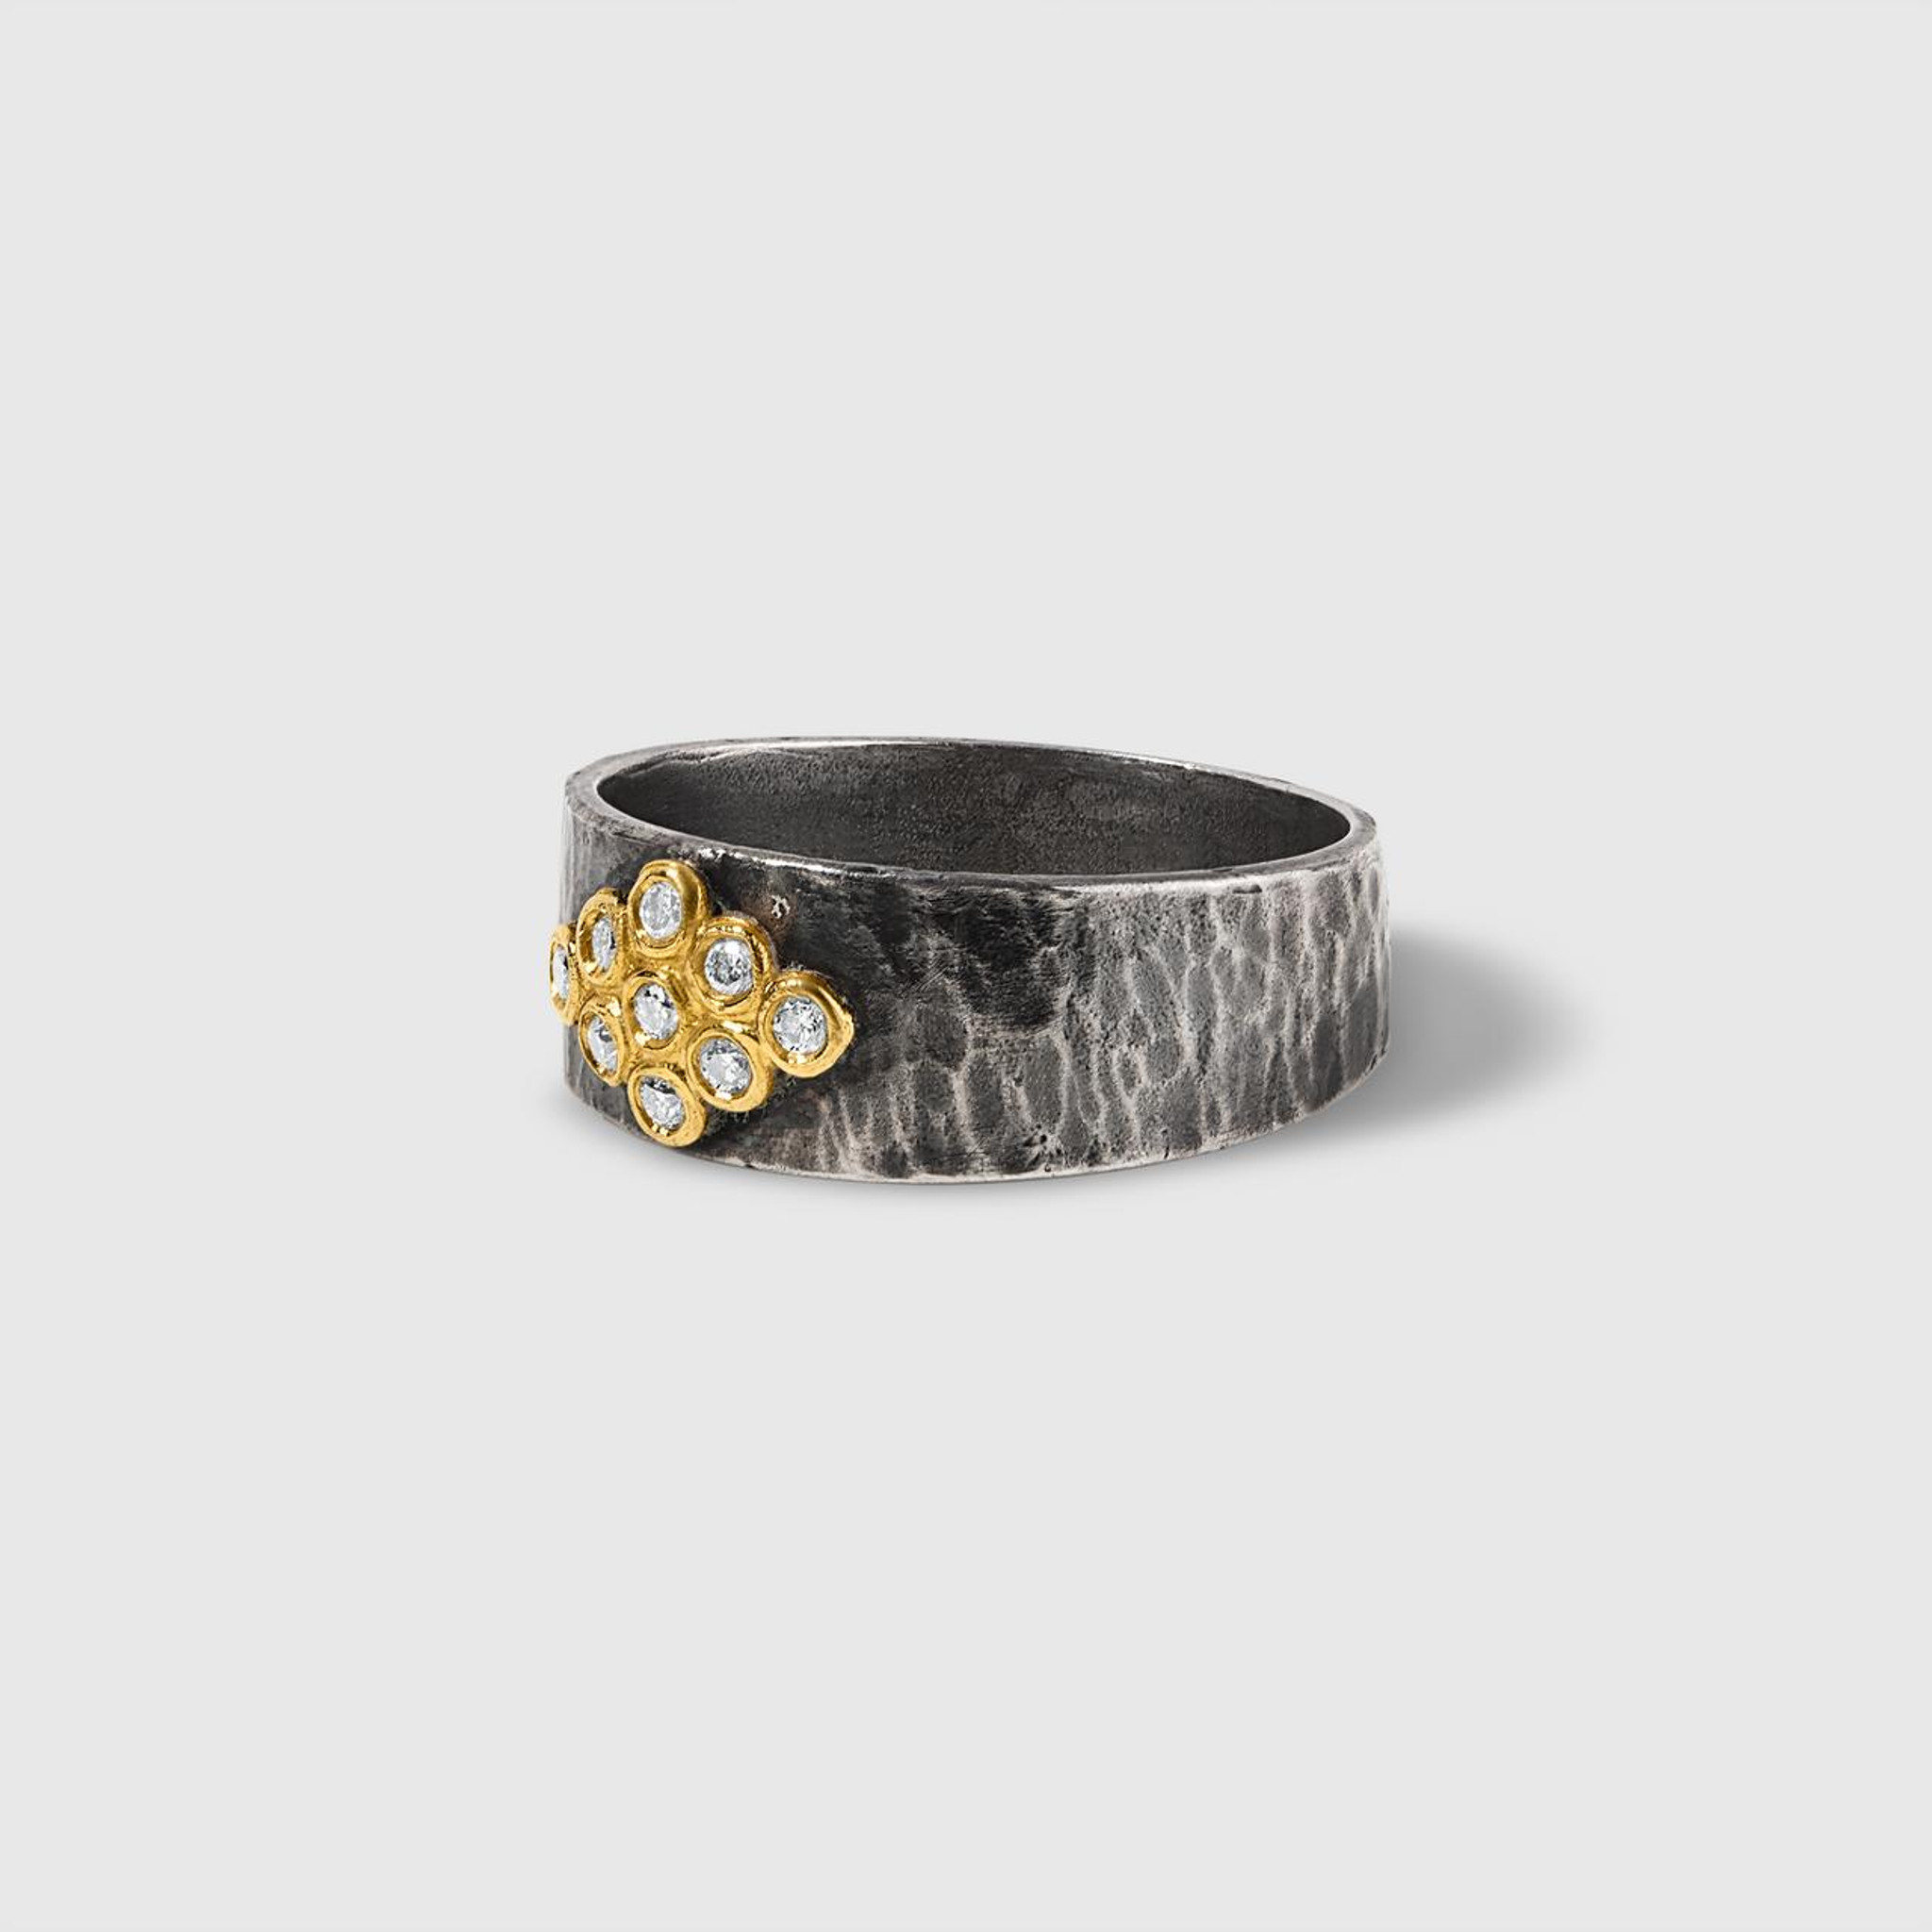 0.10ct Diamond, Rhombus Shaped Pattern Ring in 24kt Gold on Silver Band